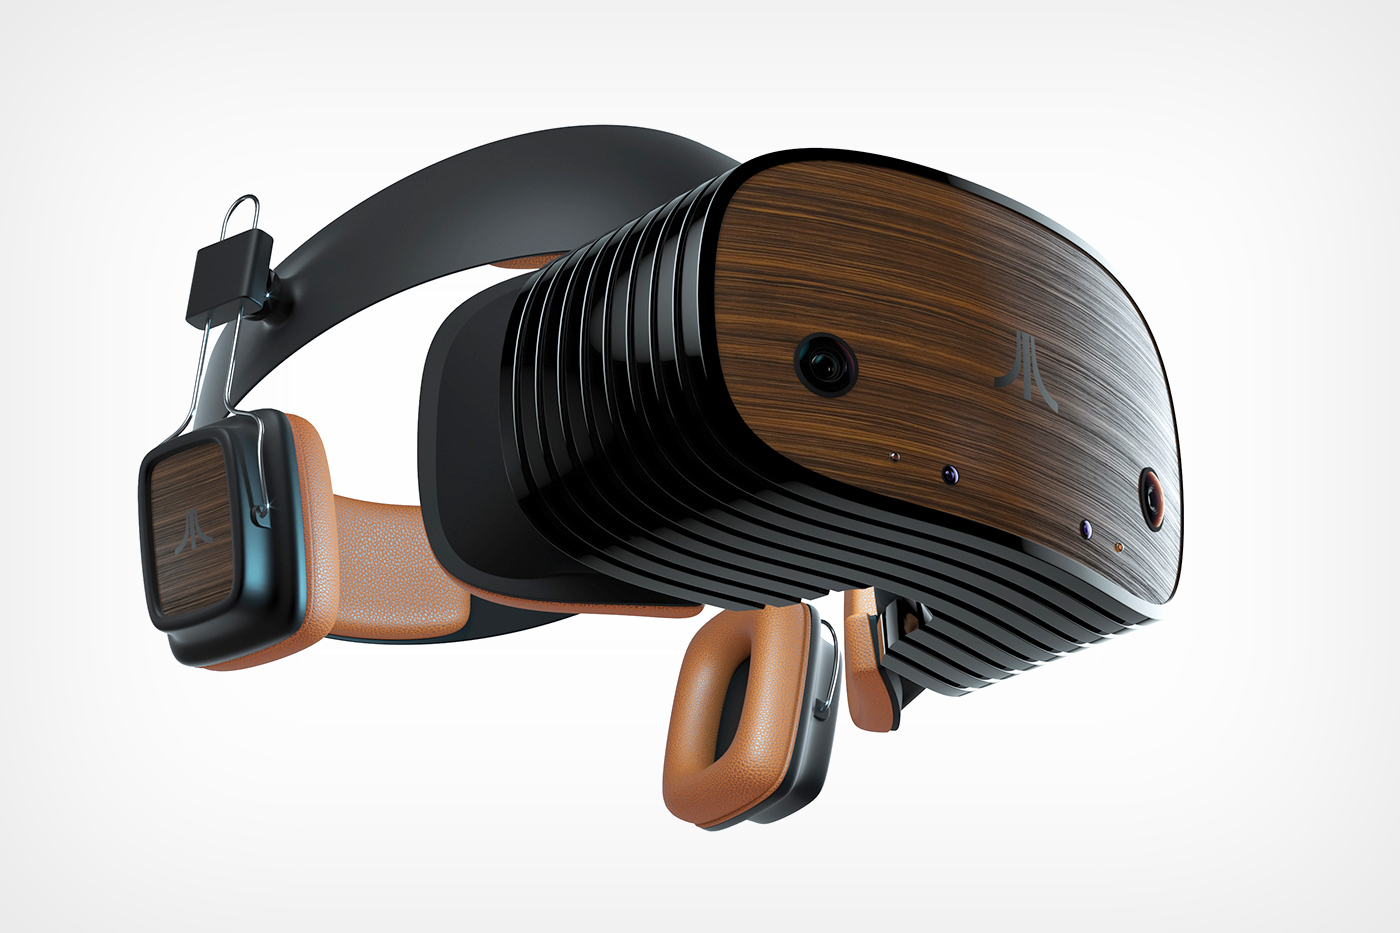 #The Atari VR Headset brings back the nostalgia of old-school gaming in a new immersive avatar